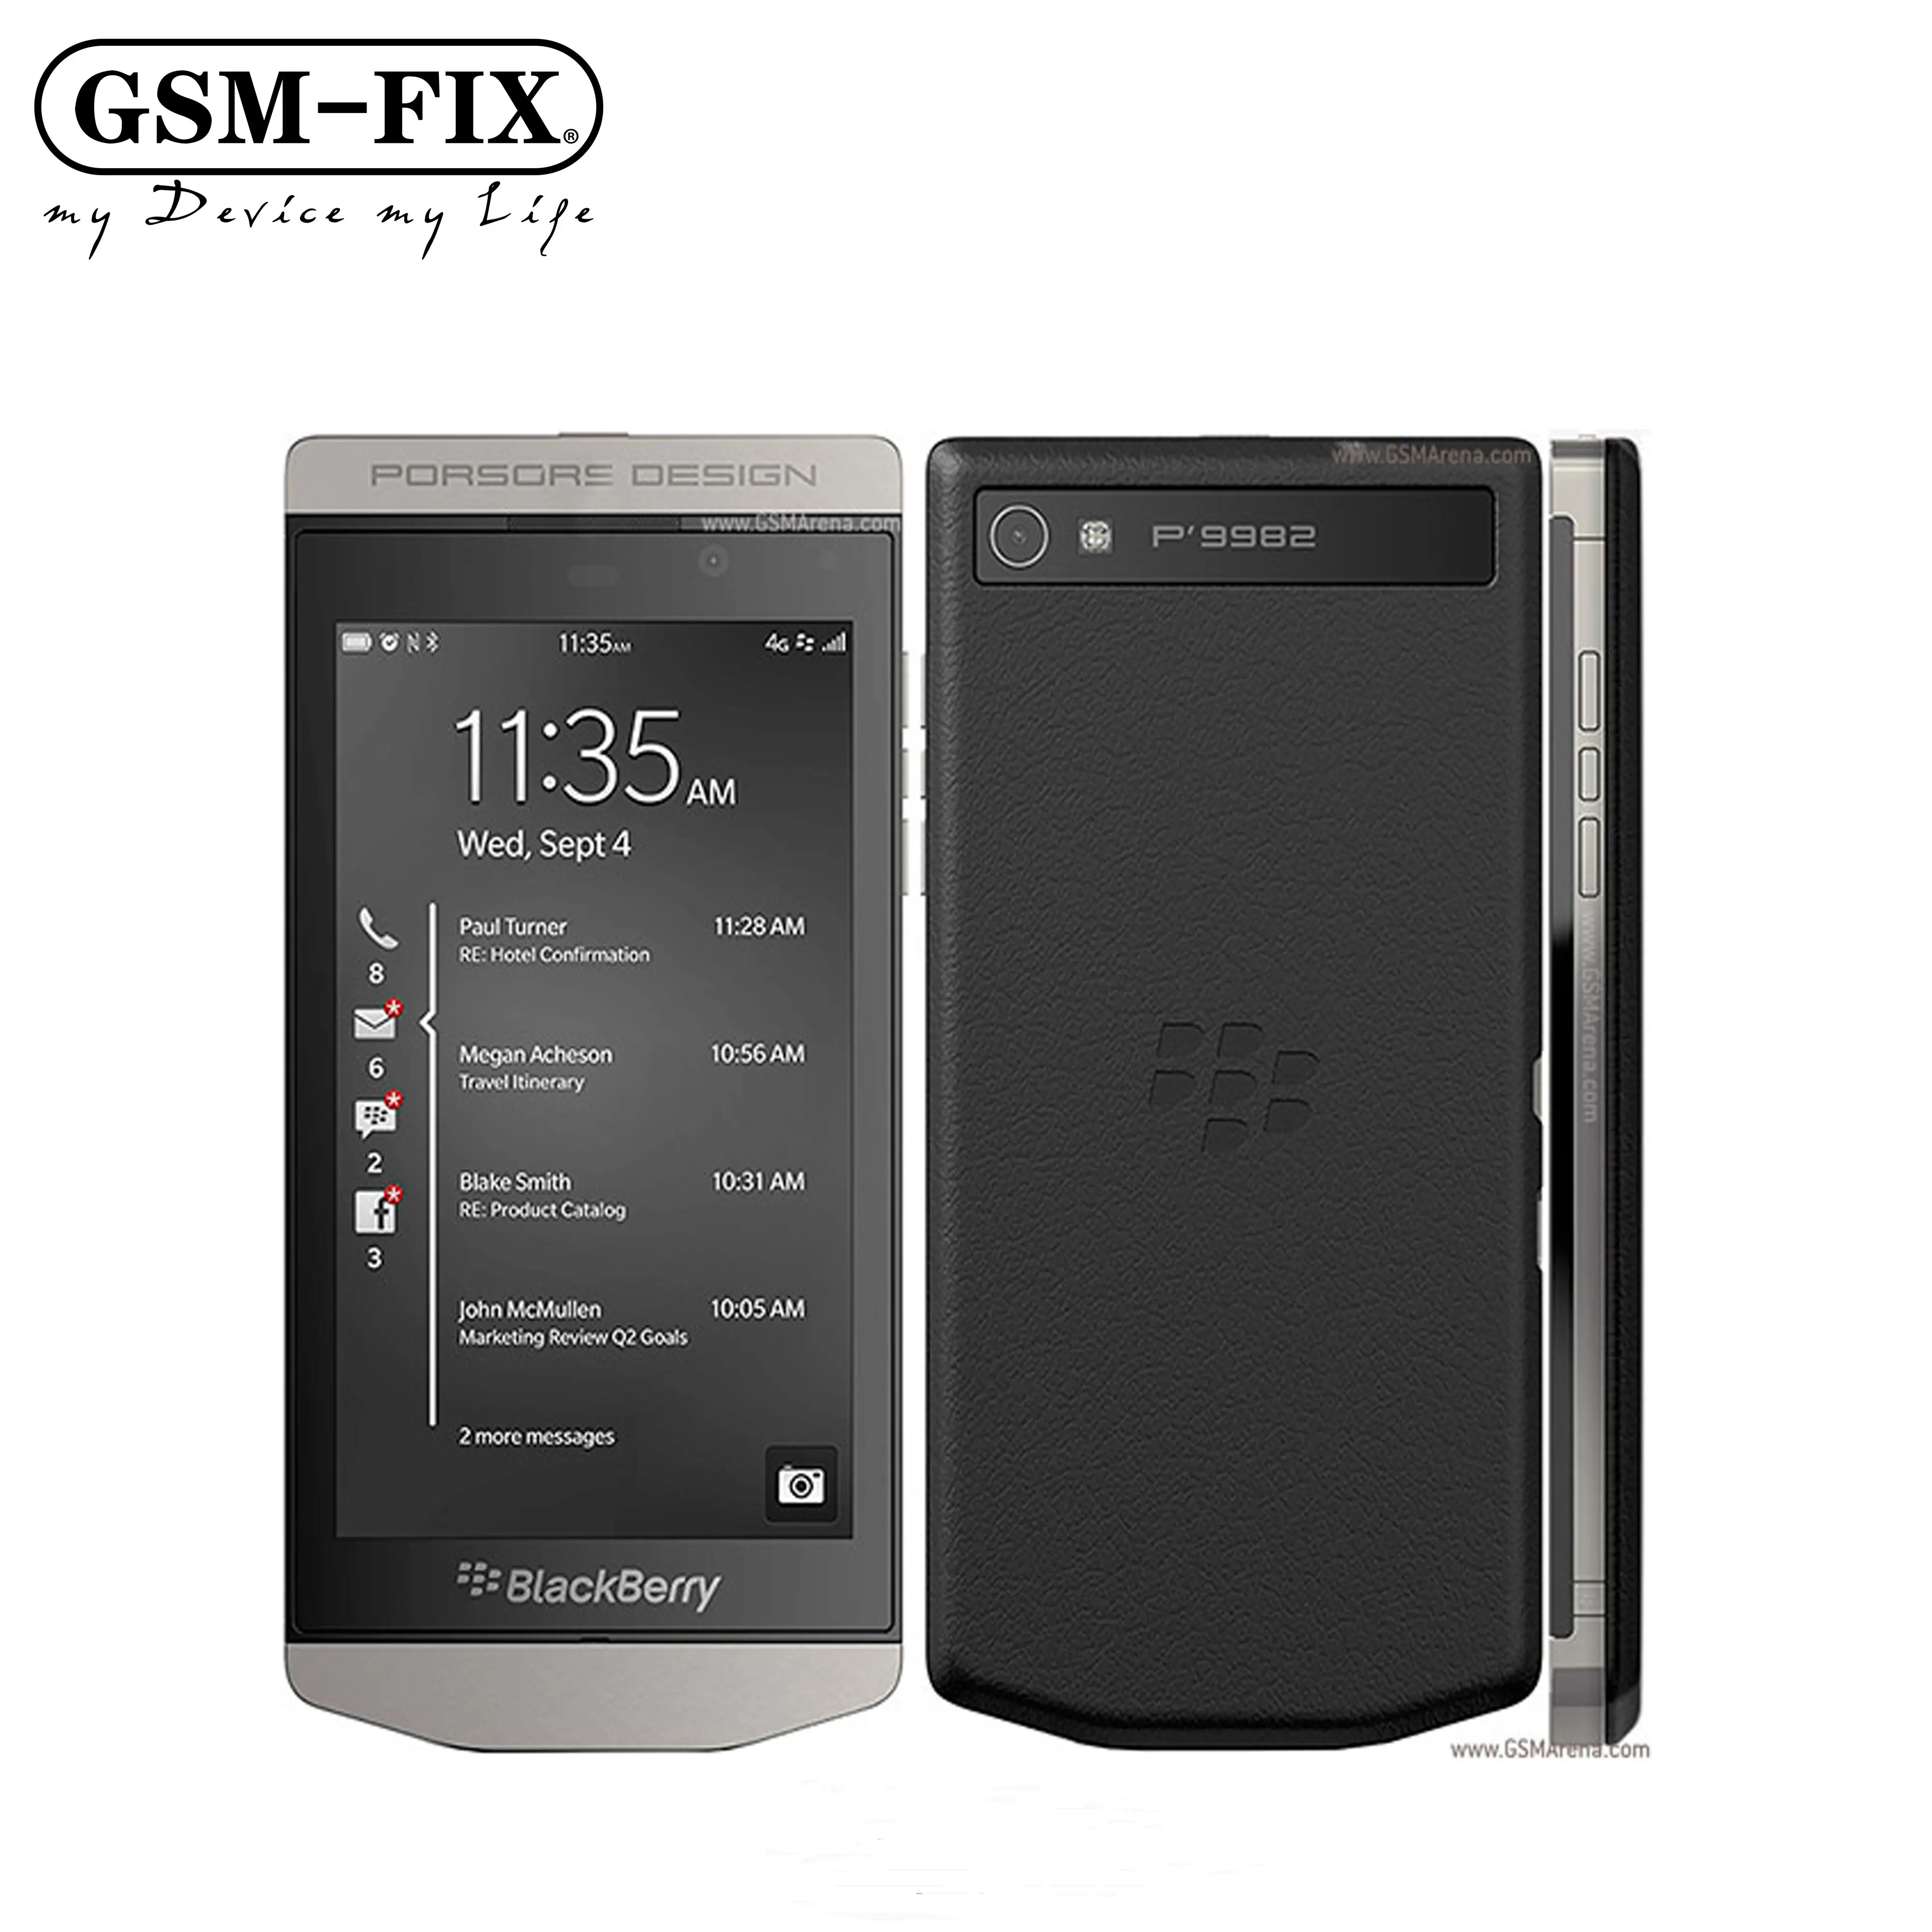 GSM-FIX For BlackBerry Porsche Design P'9982 4G LTE Mobile Phone 4.2 inches IPS LCD SmartPhone Snapdragon S4 Pro Cell Phone